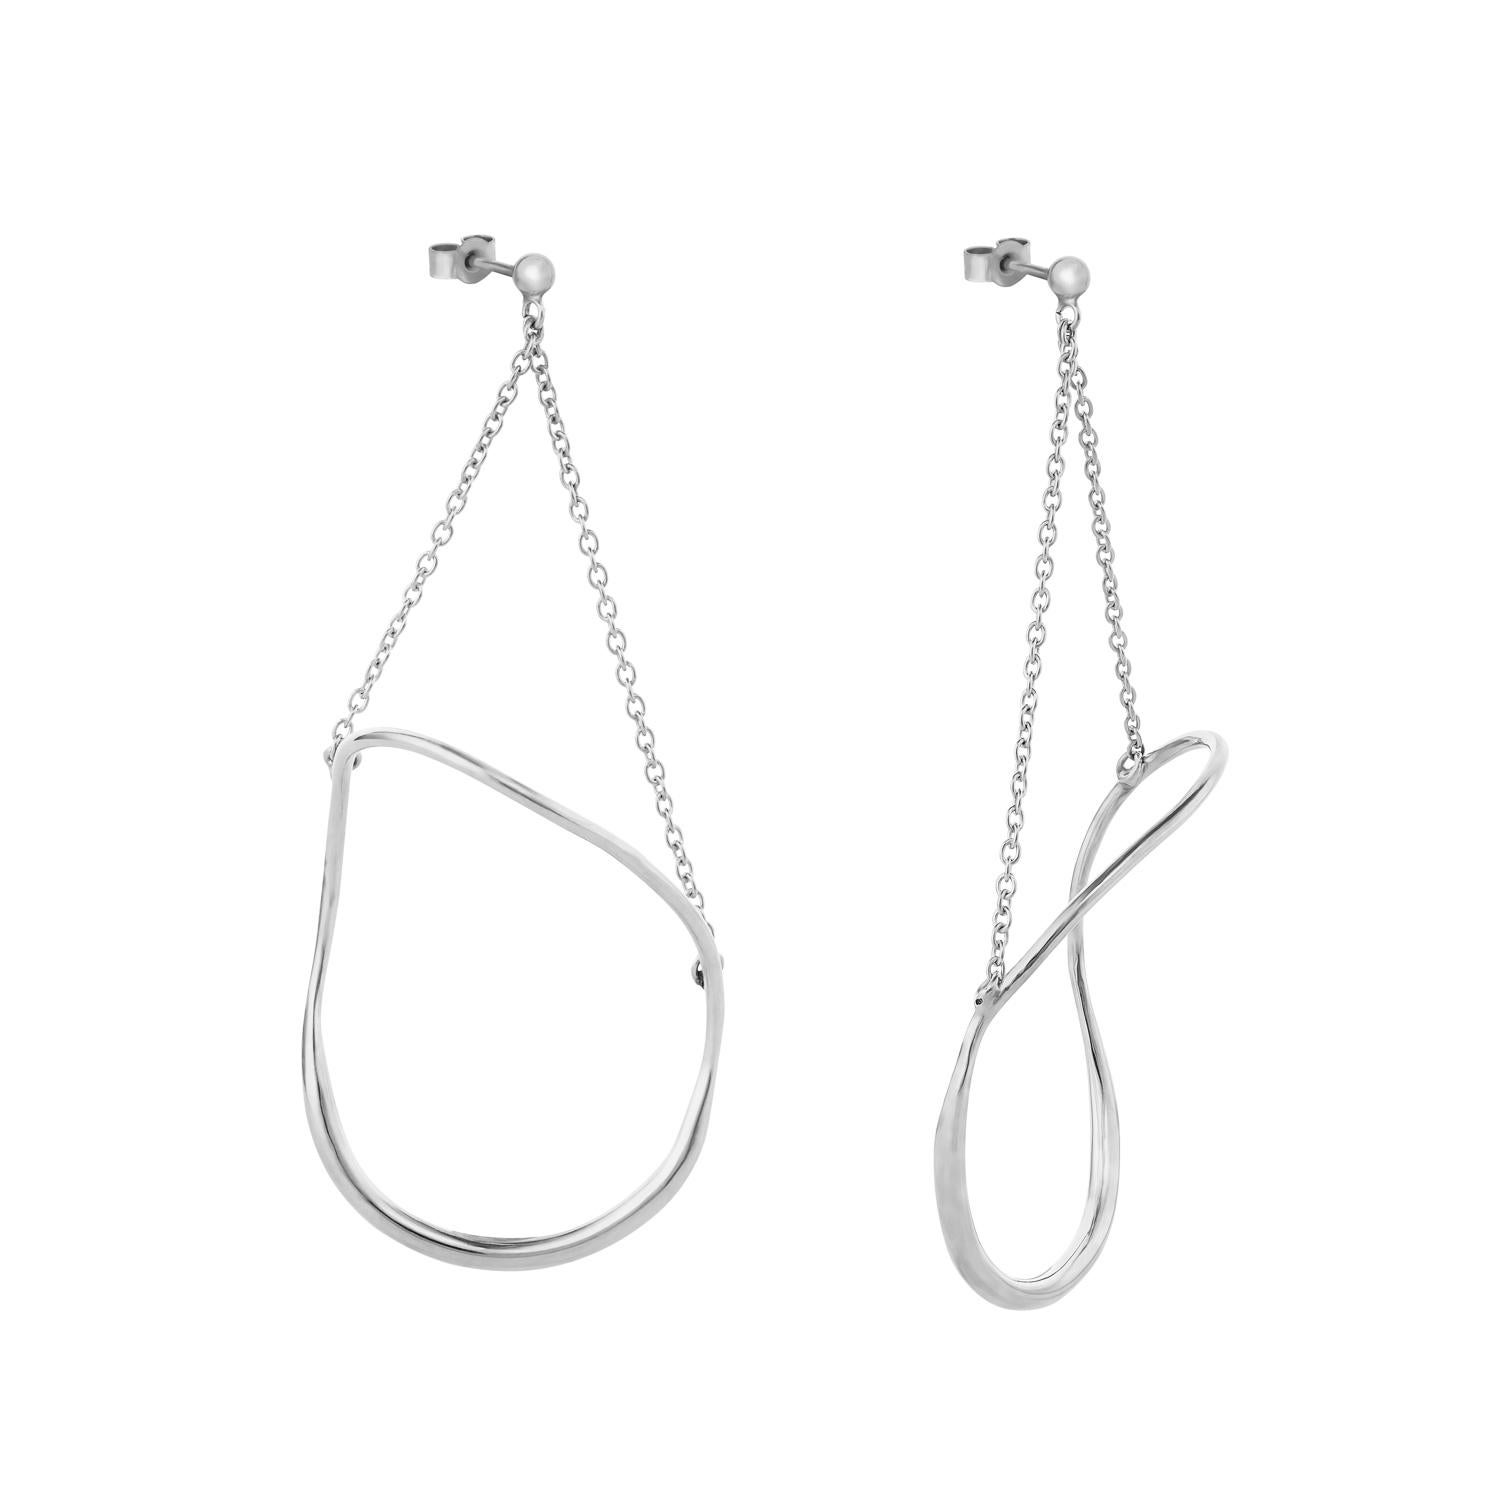 Modernist Abstract Dangle Hoop Earrings in Recycled Silver  For Sale